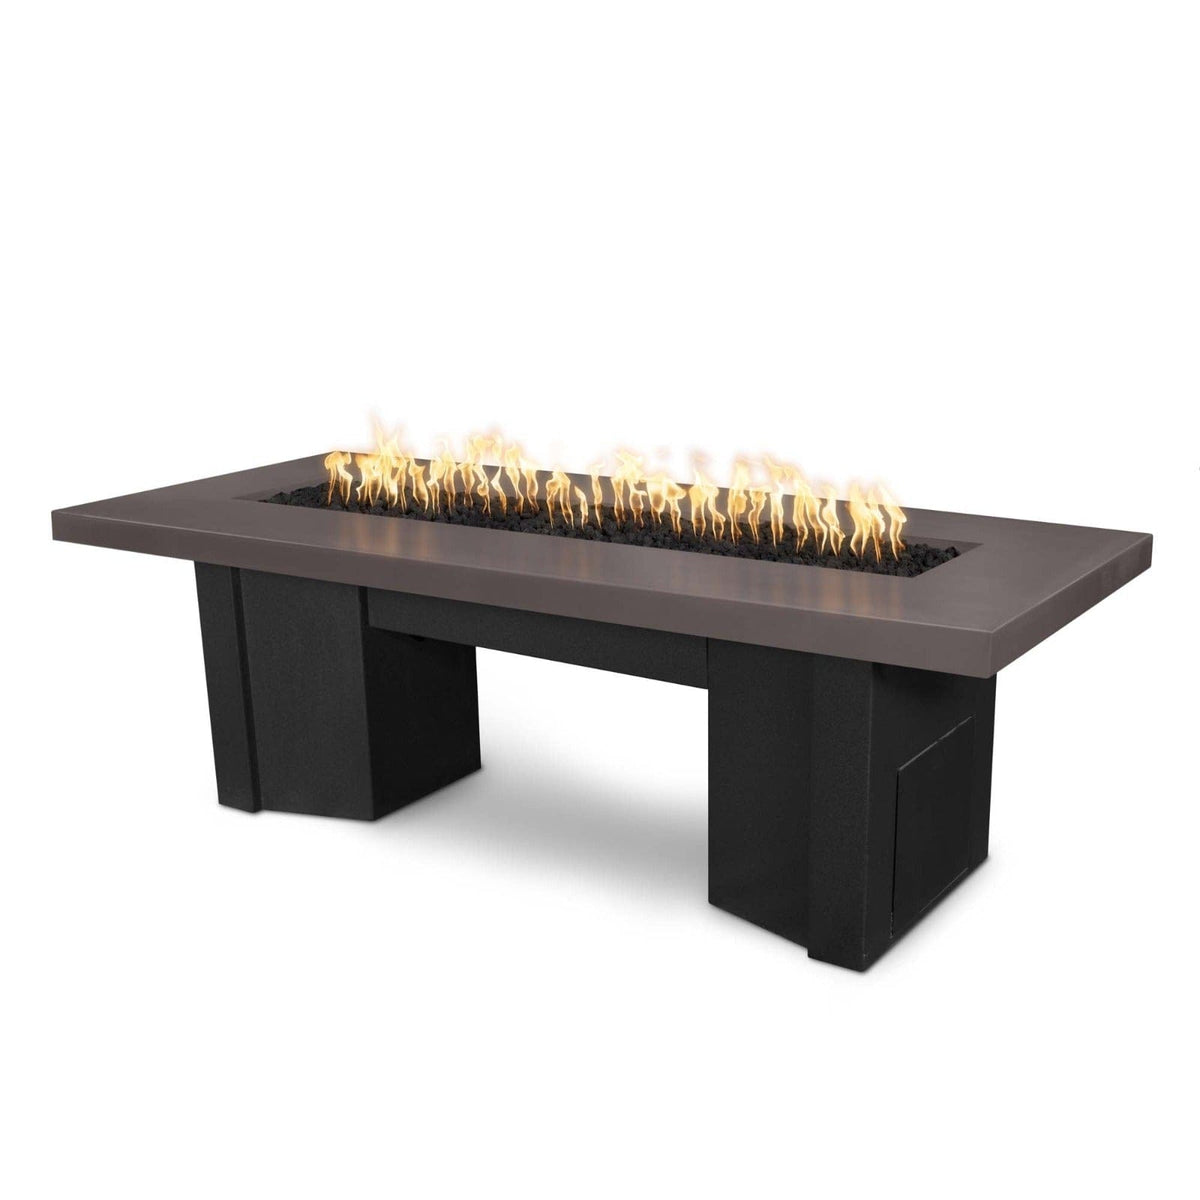 The Outdoor Plus Fire Features Chestnut (-CST) / Black Powder Coated Steel (-BLK) The Outdoor Plus 78&quot; Alameda Fire Table Smooth Concrete in Liquid Propane - Flame Sense System with Push Button Spark Igniter / OPT-ALMGFRC78FSEN-LP